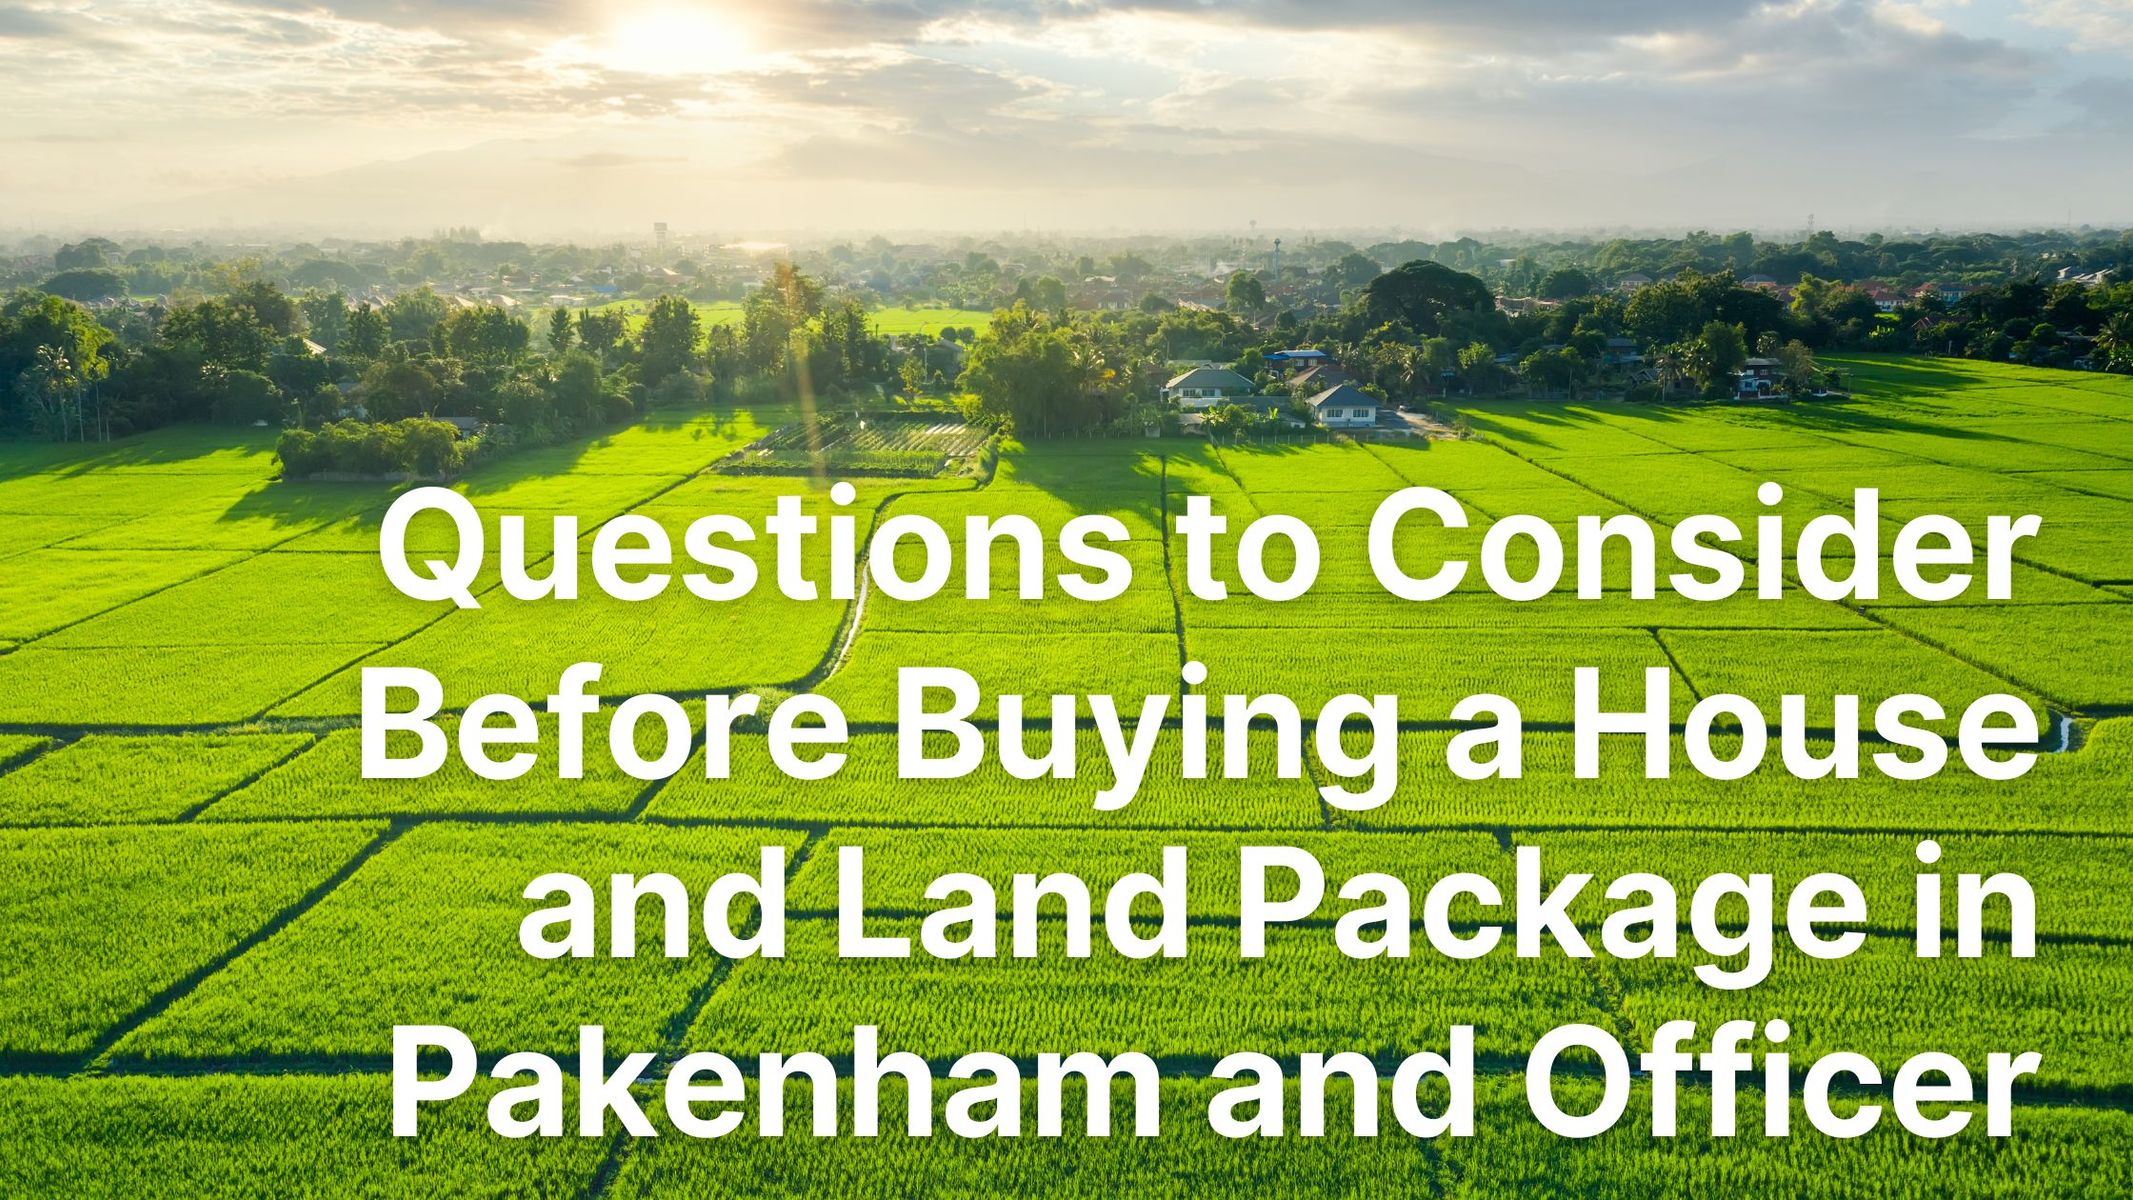 Questions to Consider Before Buying a House and Land Package in Pakenham and Officer